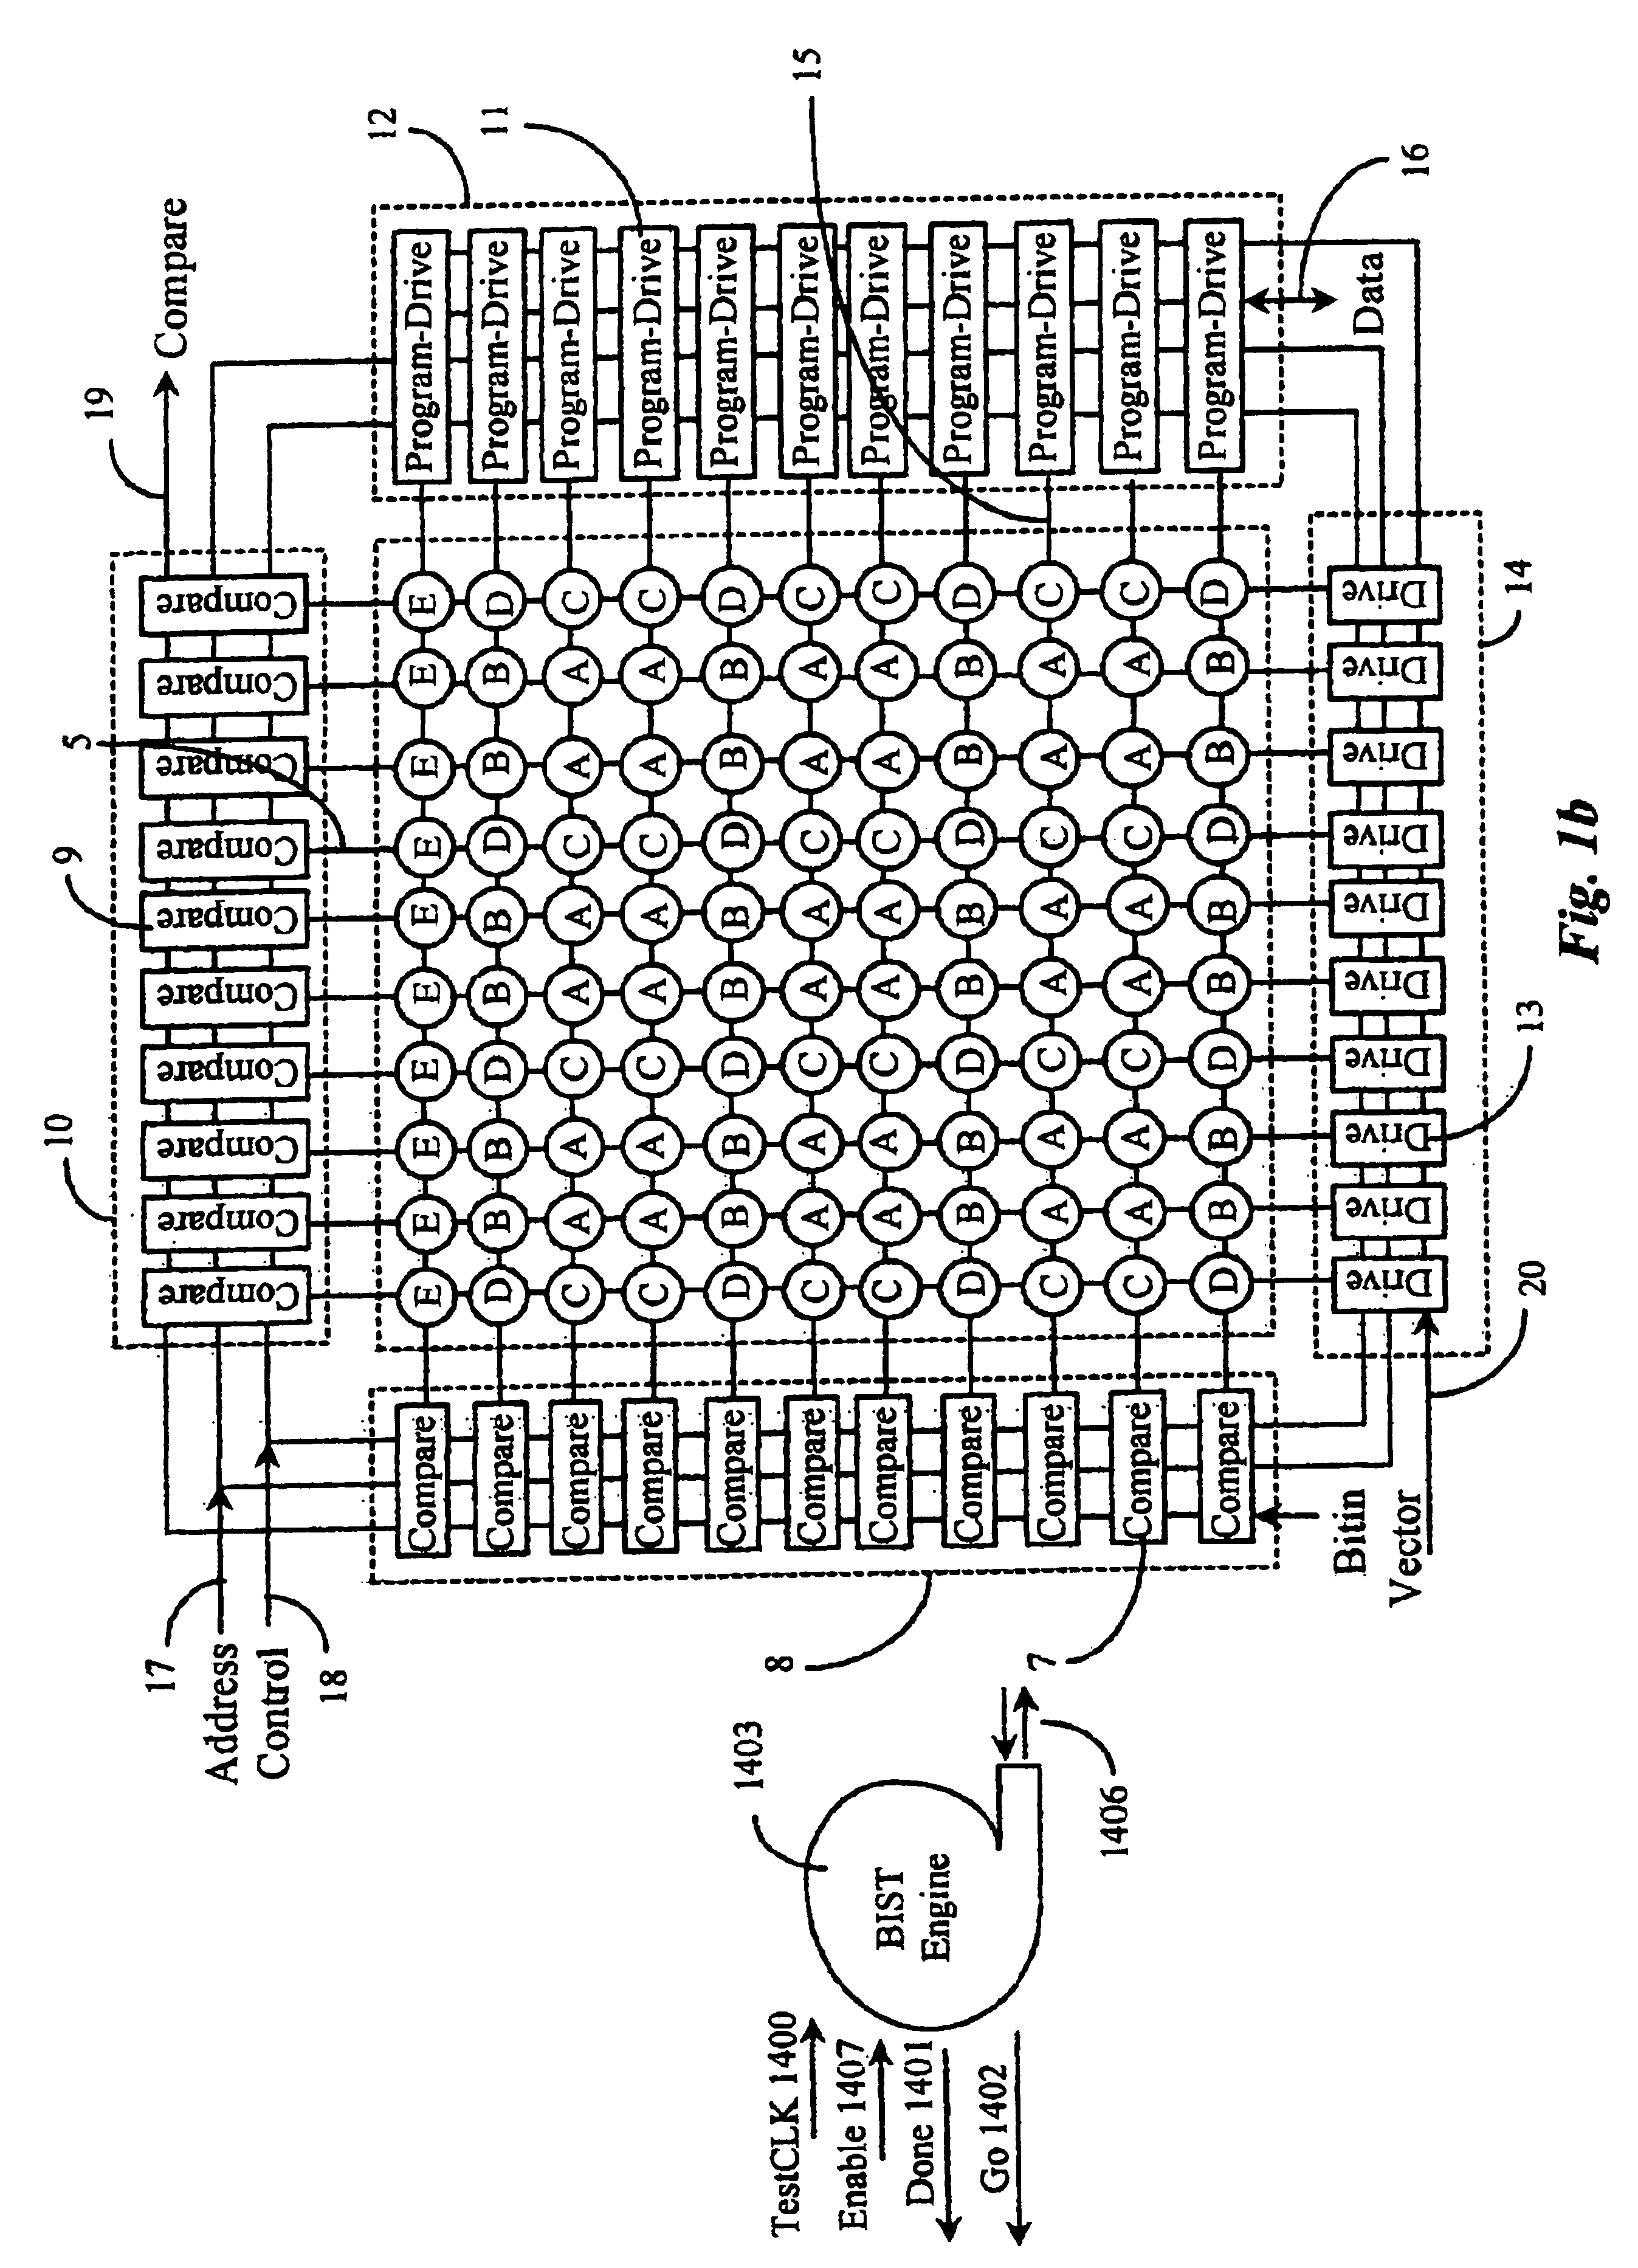 Apparatus and method for self testing programmable logic arrays